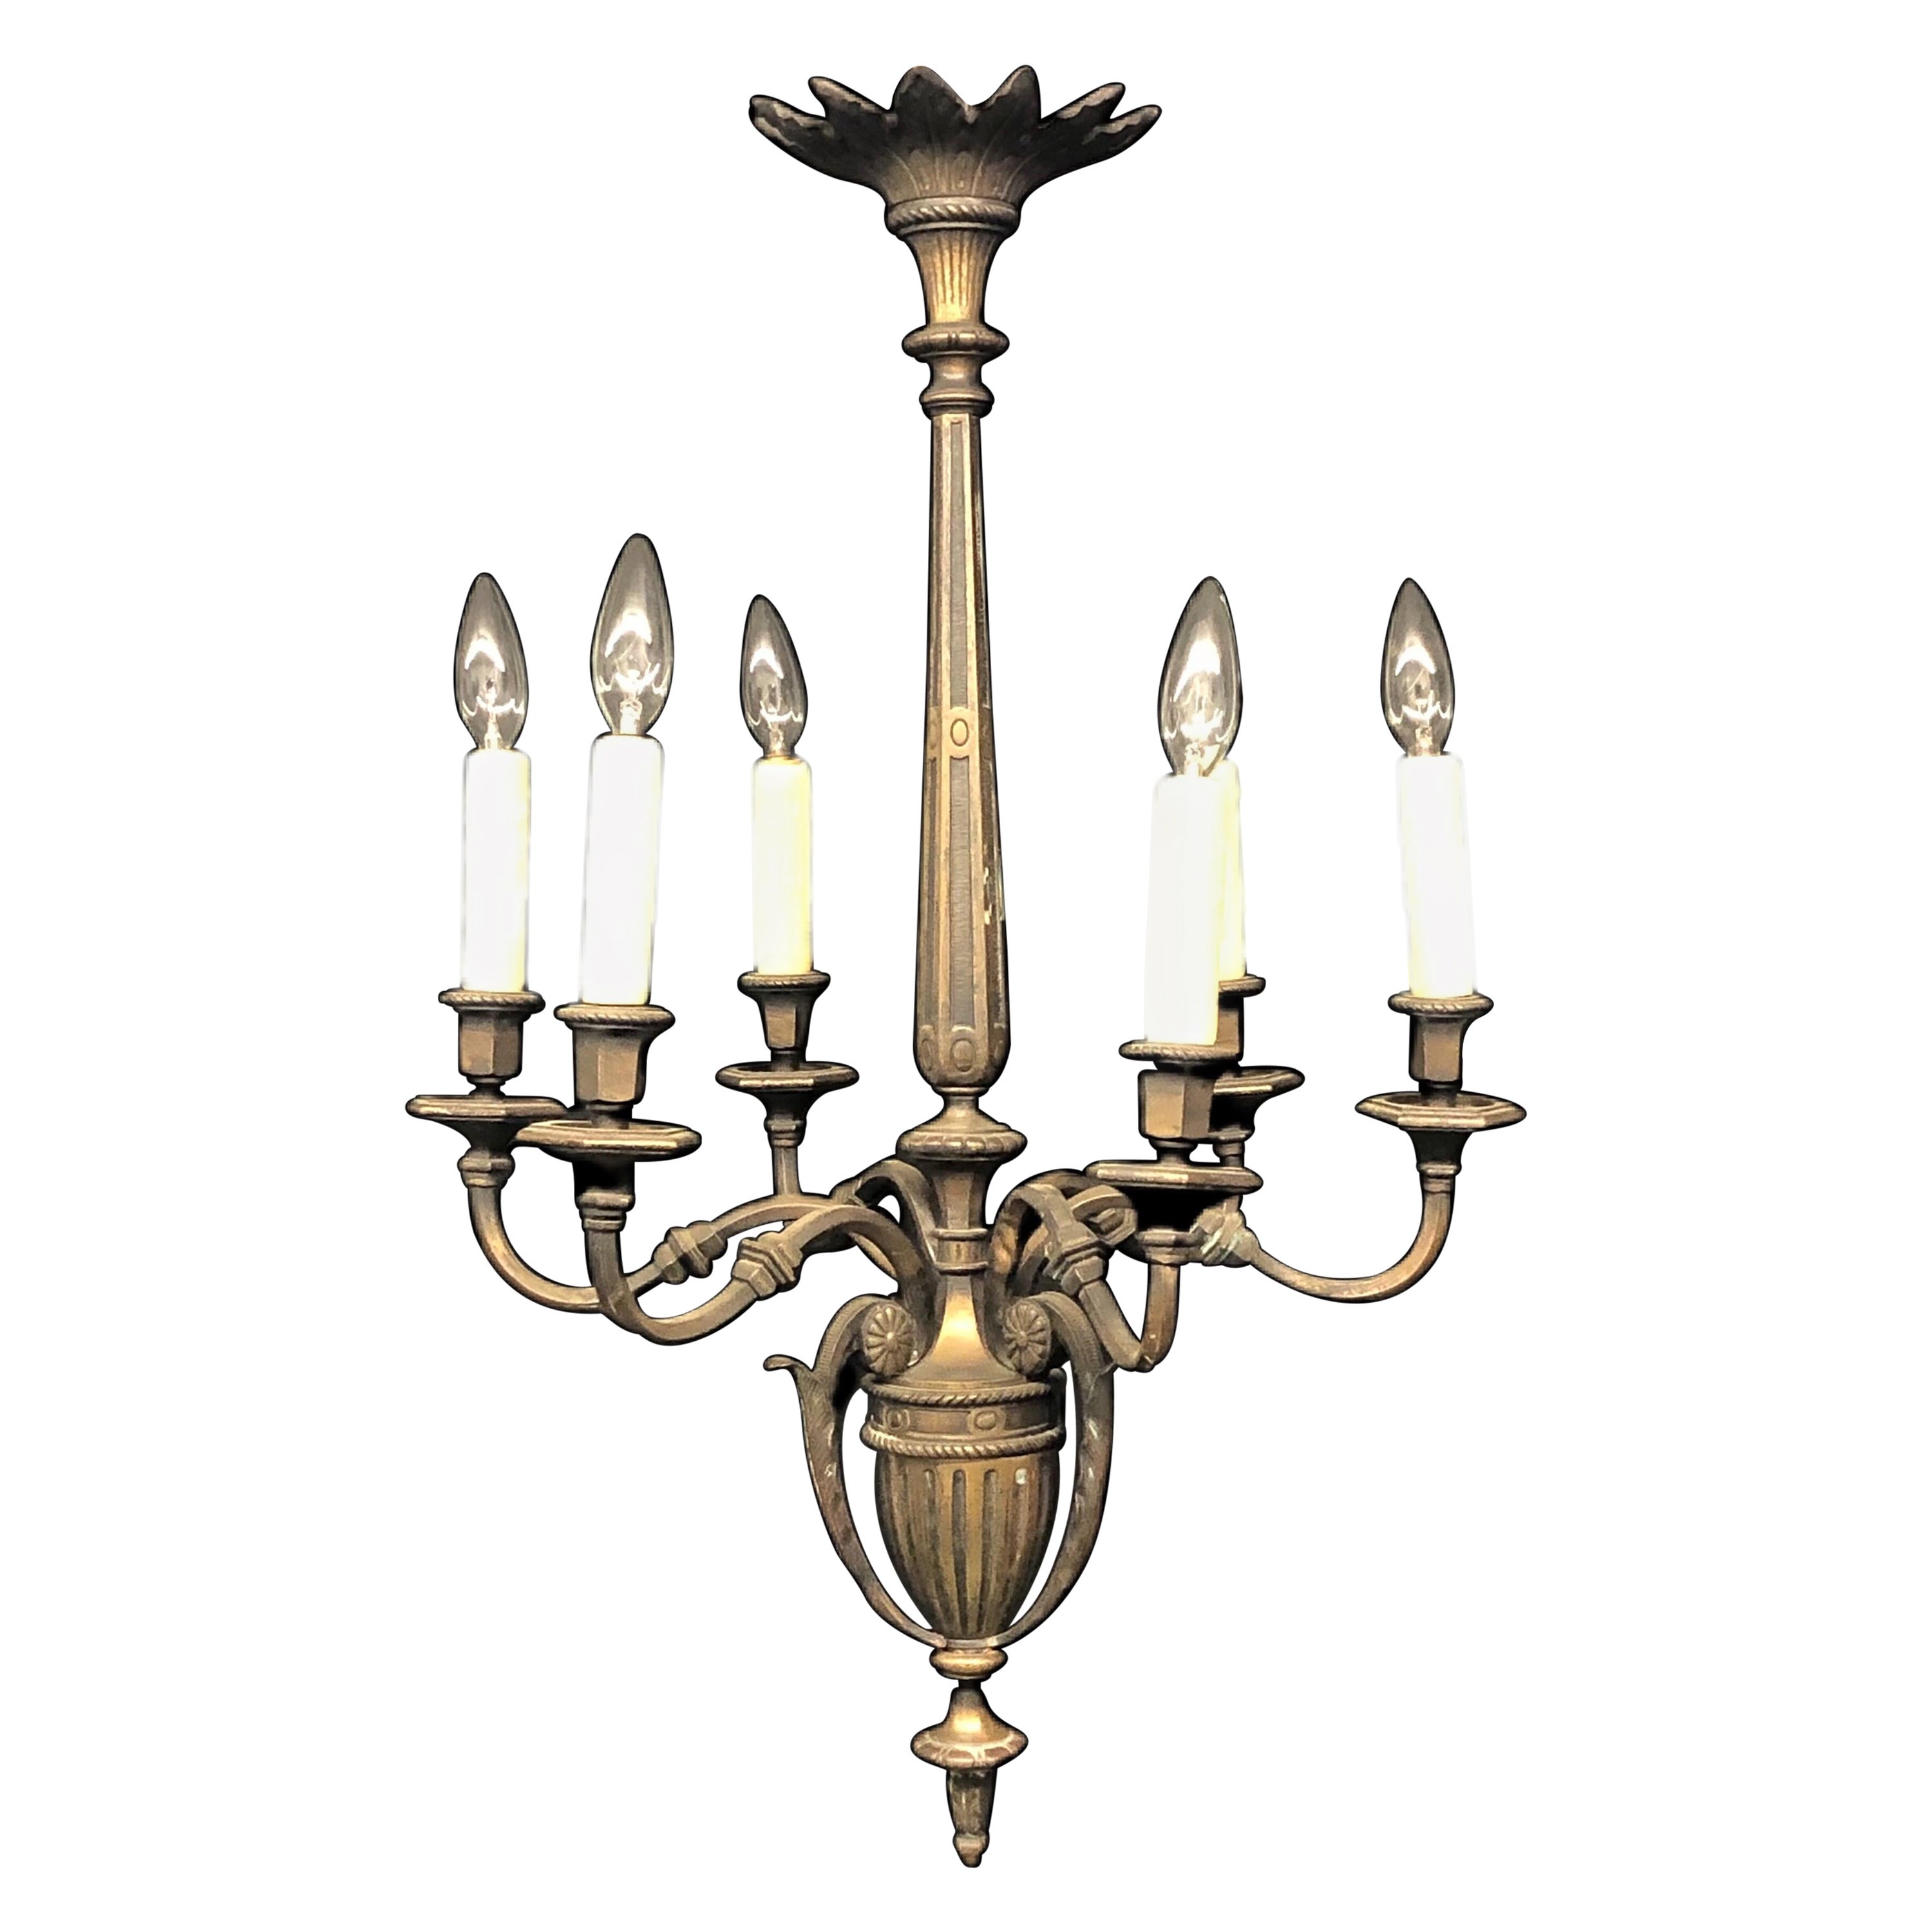  Neoclassical Style French Brass Chandelier, Early 20th C.